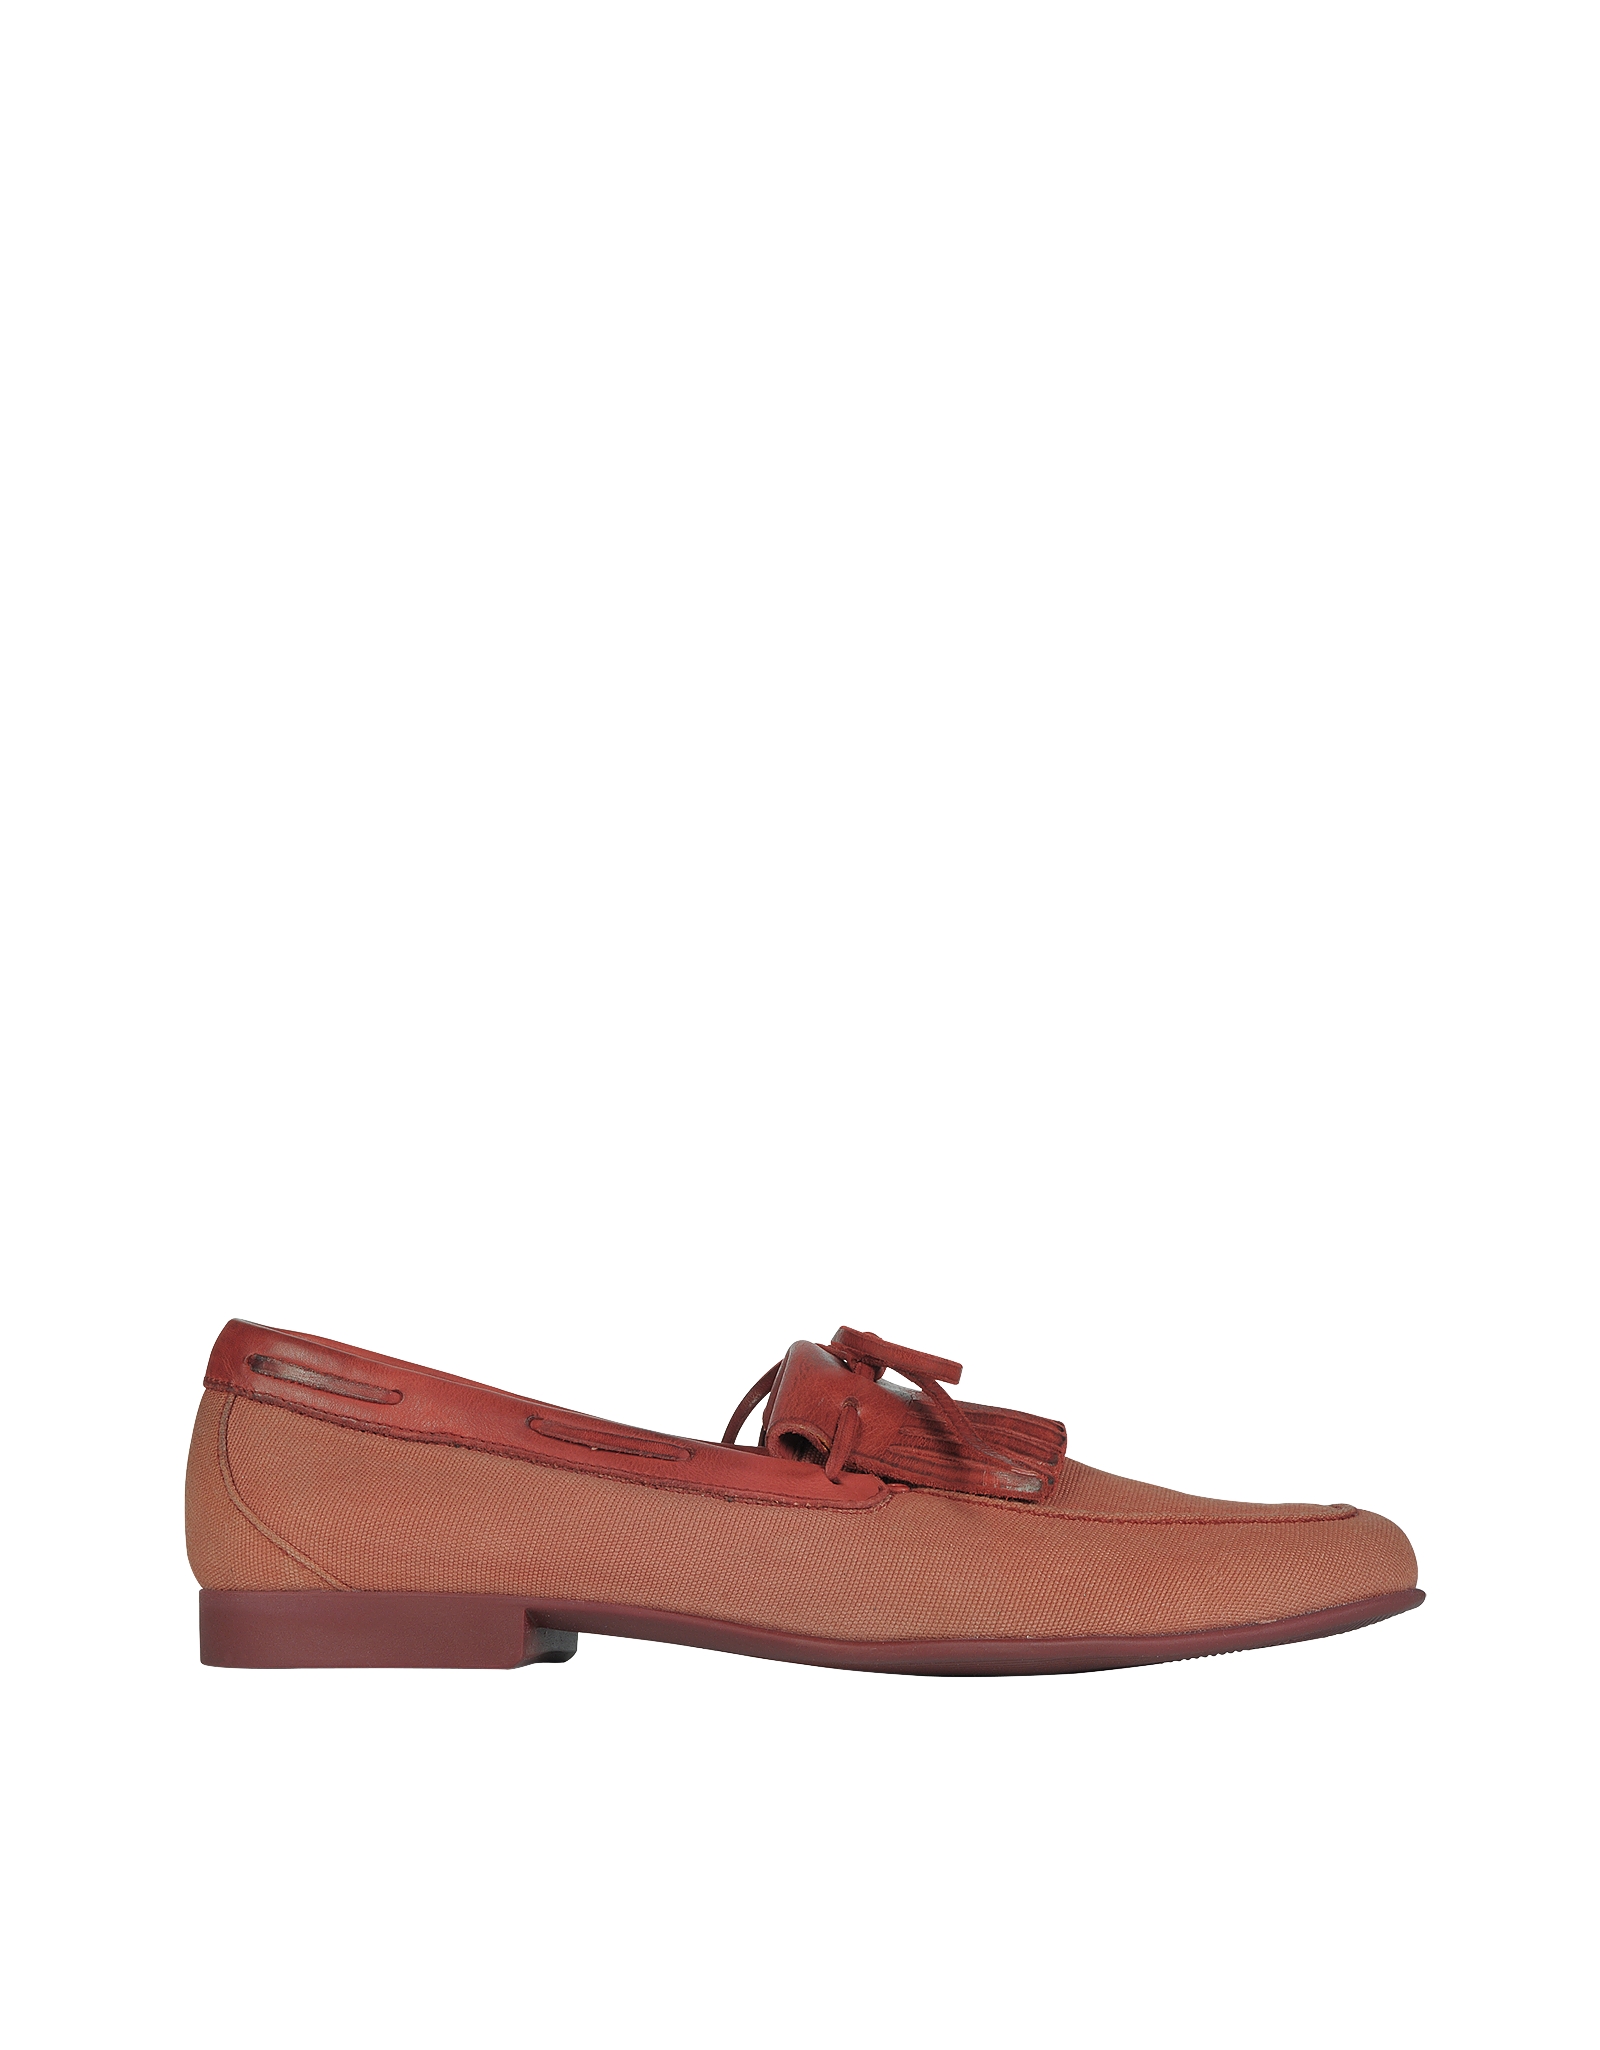 Fratelli Rossetti Yacht Canvas and Leather Fringed Loafer in Brown - Lyst